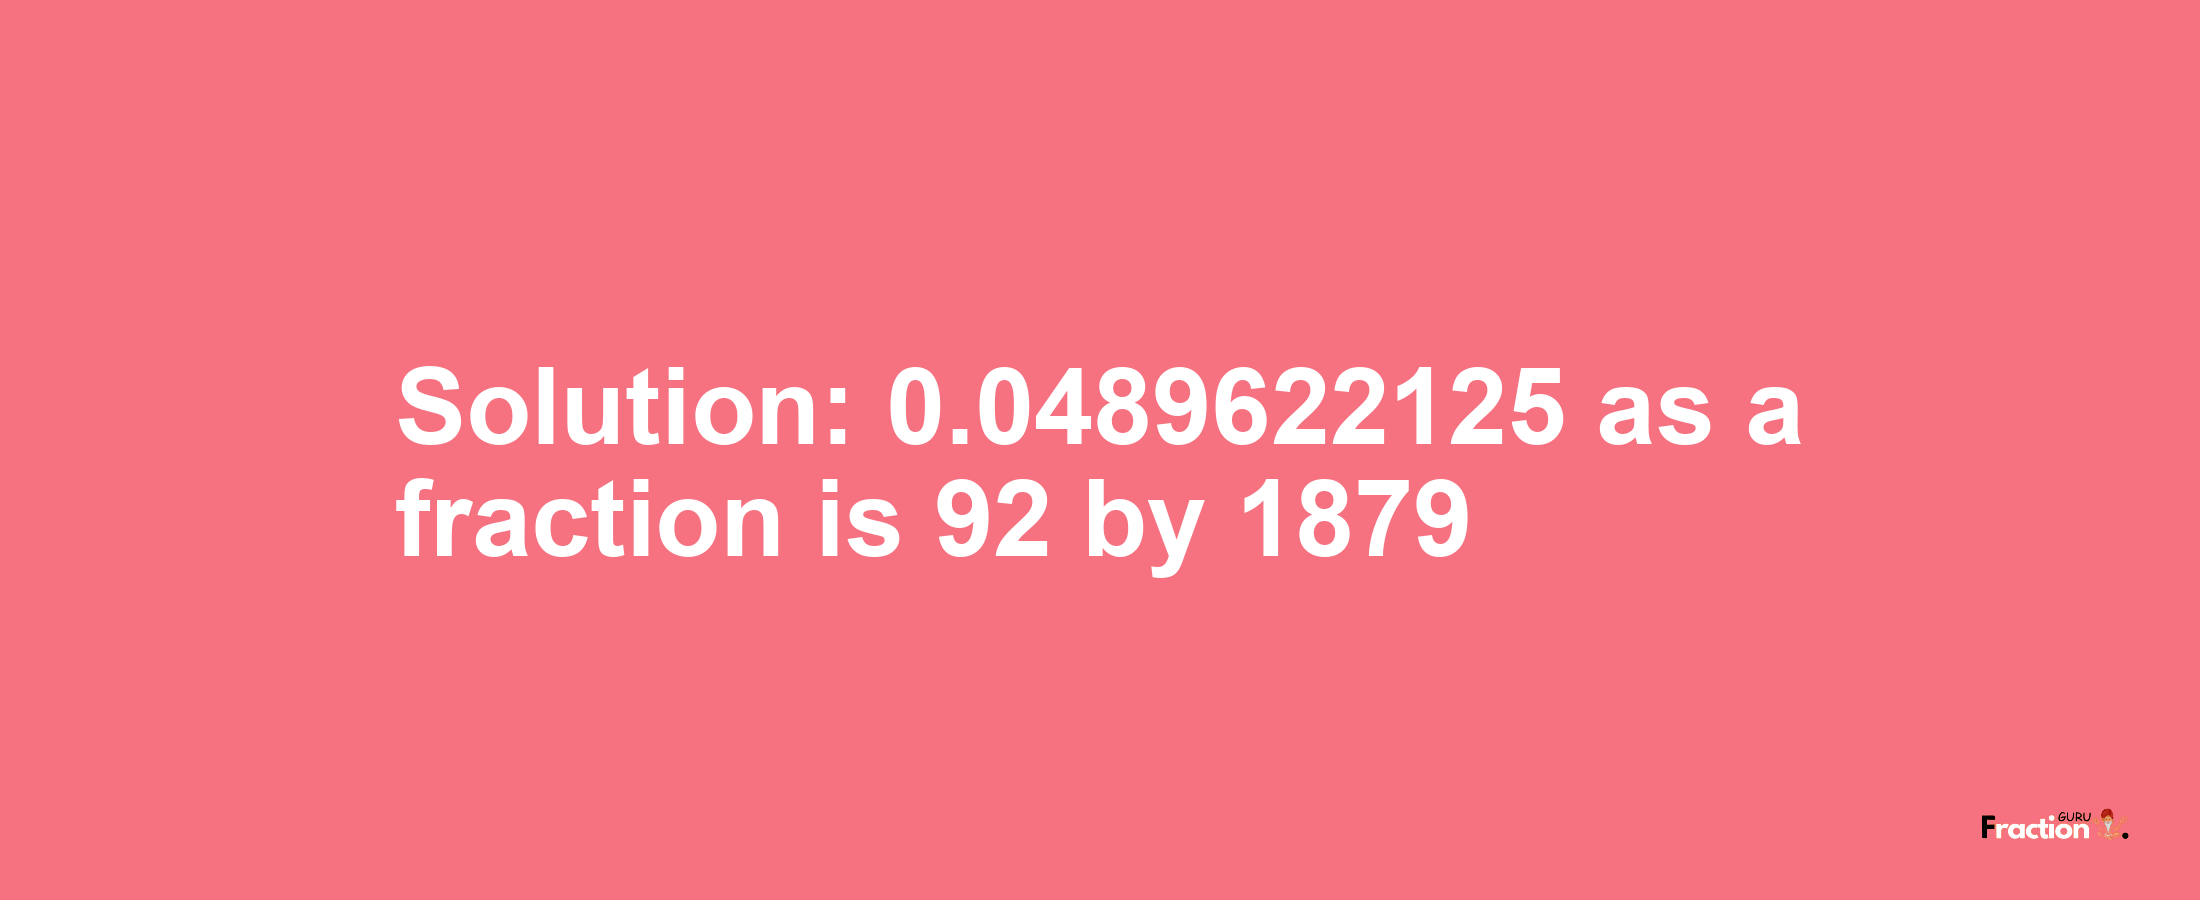 Solution:0.0489622125 as a fraction is 92/1879